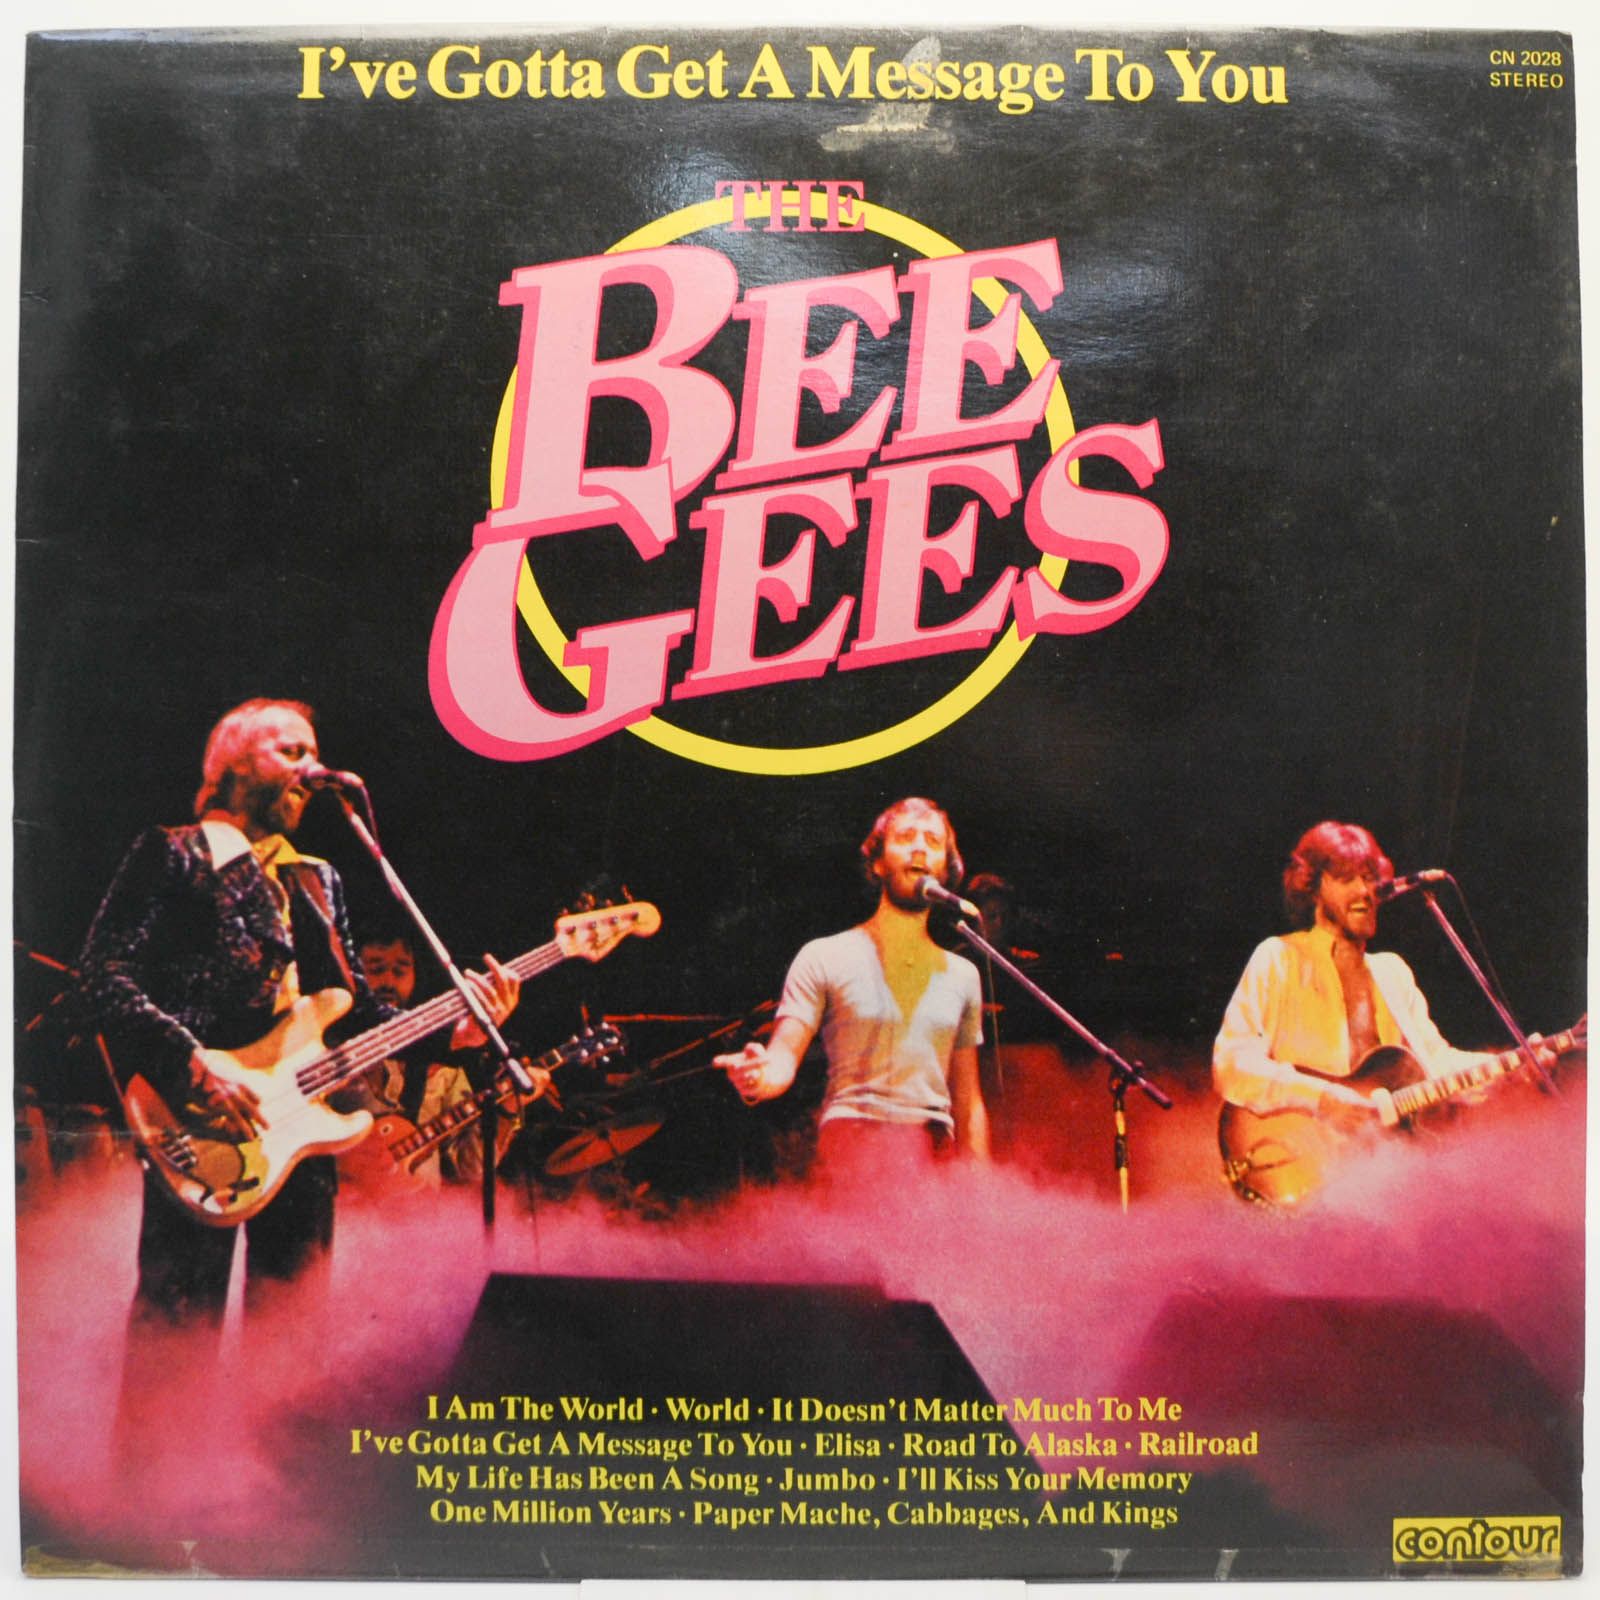 Bee Gees — I've Gotta Get A Message To You (UK), 1978